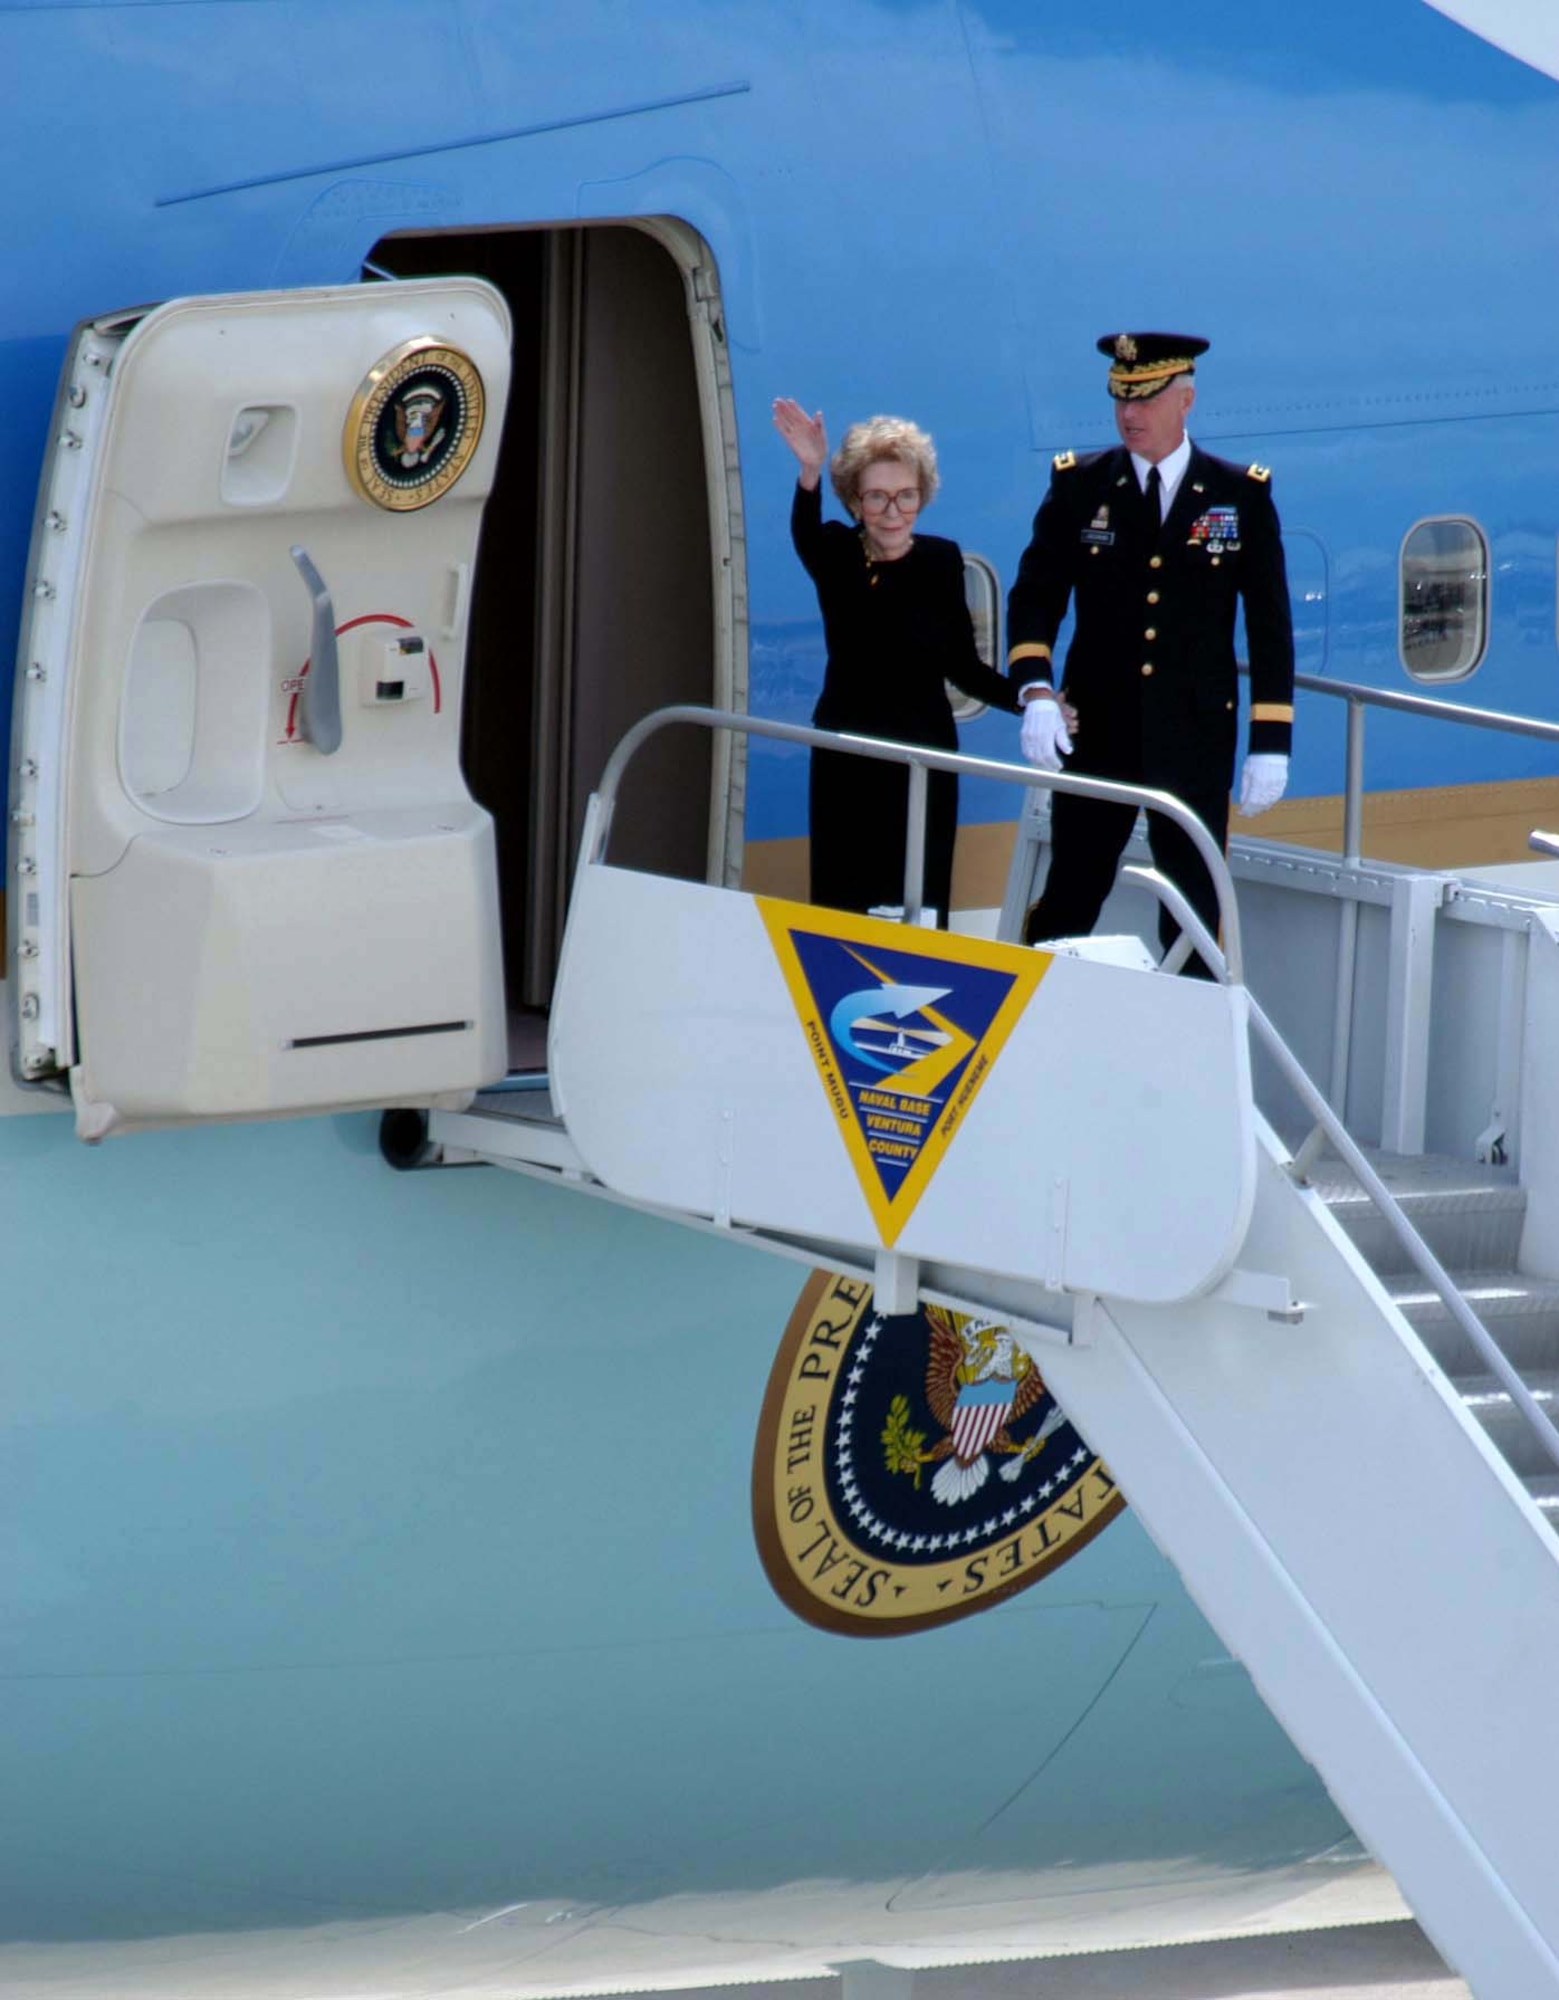 NAVAL BASE VENTURA COUNTY, Calif. -- Army Maj. Gen. Galen B. Jackman escorts former first lady Nancy Reagan as former President Ronald Reagan's casket is placed aboard an Air Force VC-25 here June 9.  President Reagan's body was flown to Andrews Air Force Base, Md., en route to Washington to lie in state in the U.S. Capitol Rotunda until June 11.  General Jackman is commander of the Military District of Washington.  (U.S. Navy photo by Petty Officer 1st Class Jon D. Gesch)